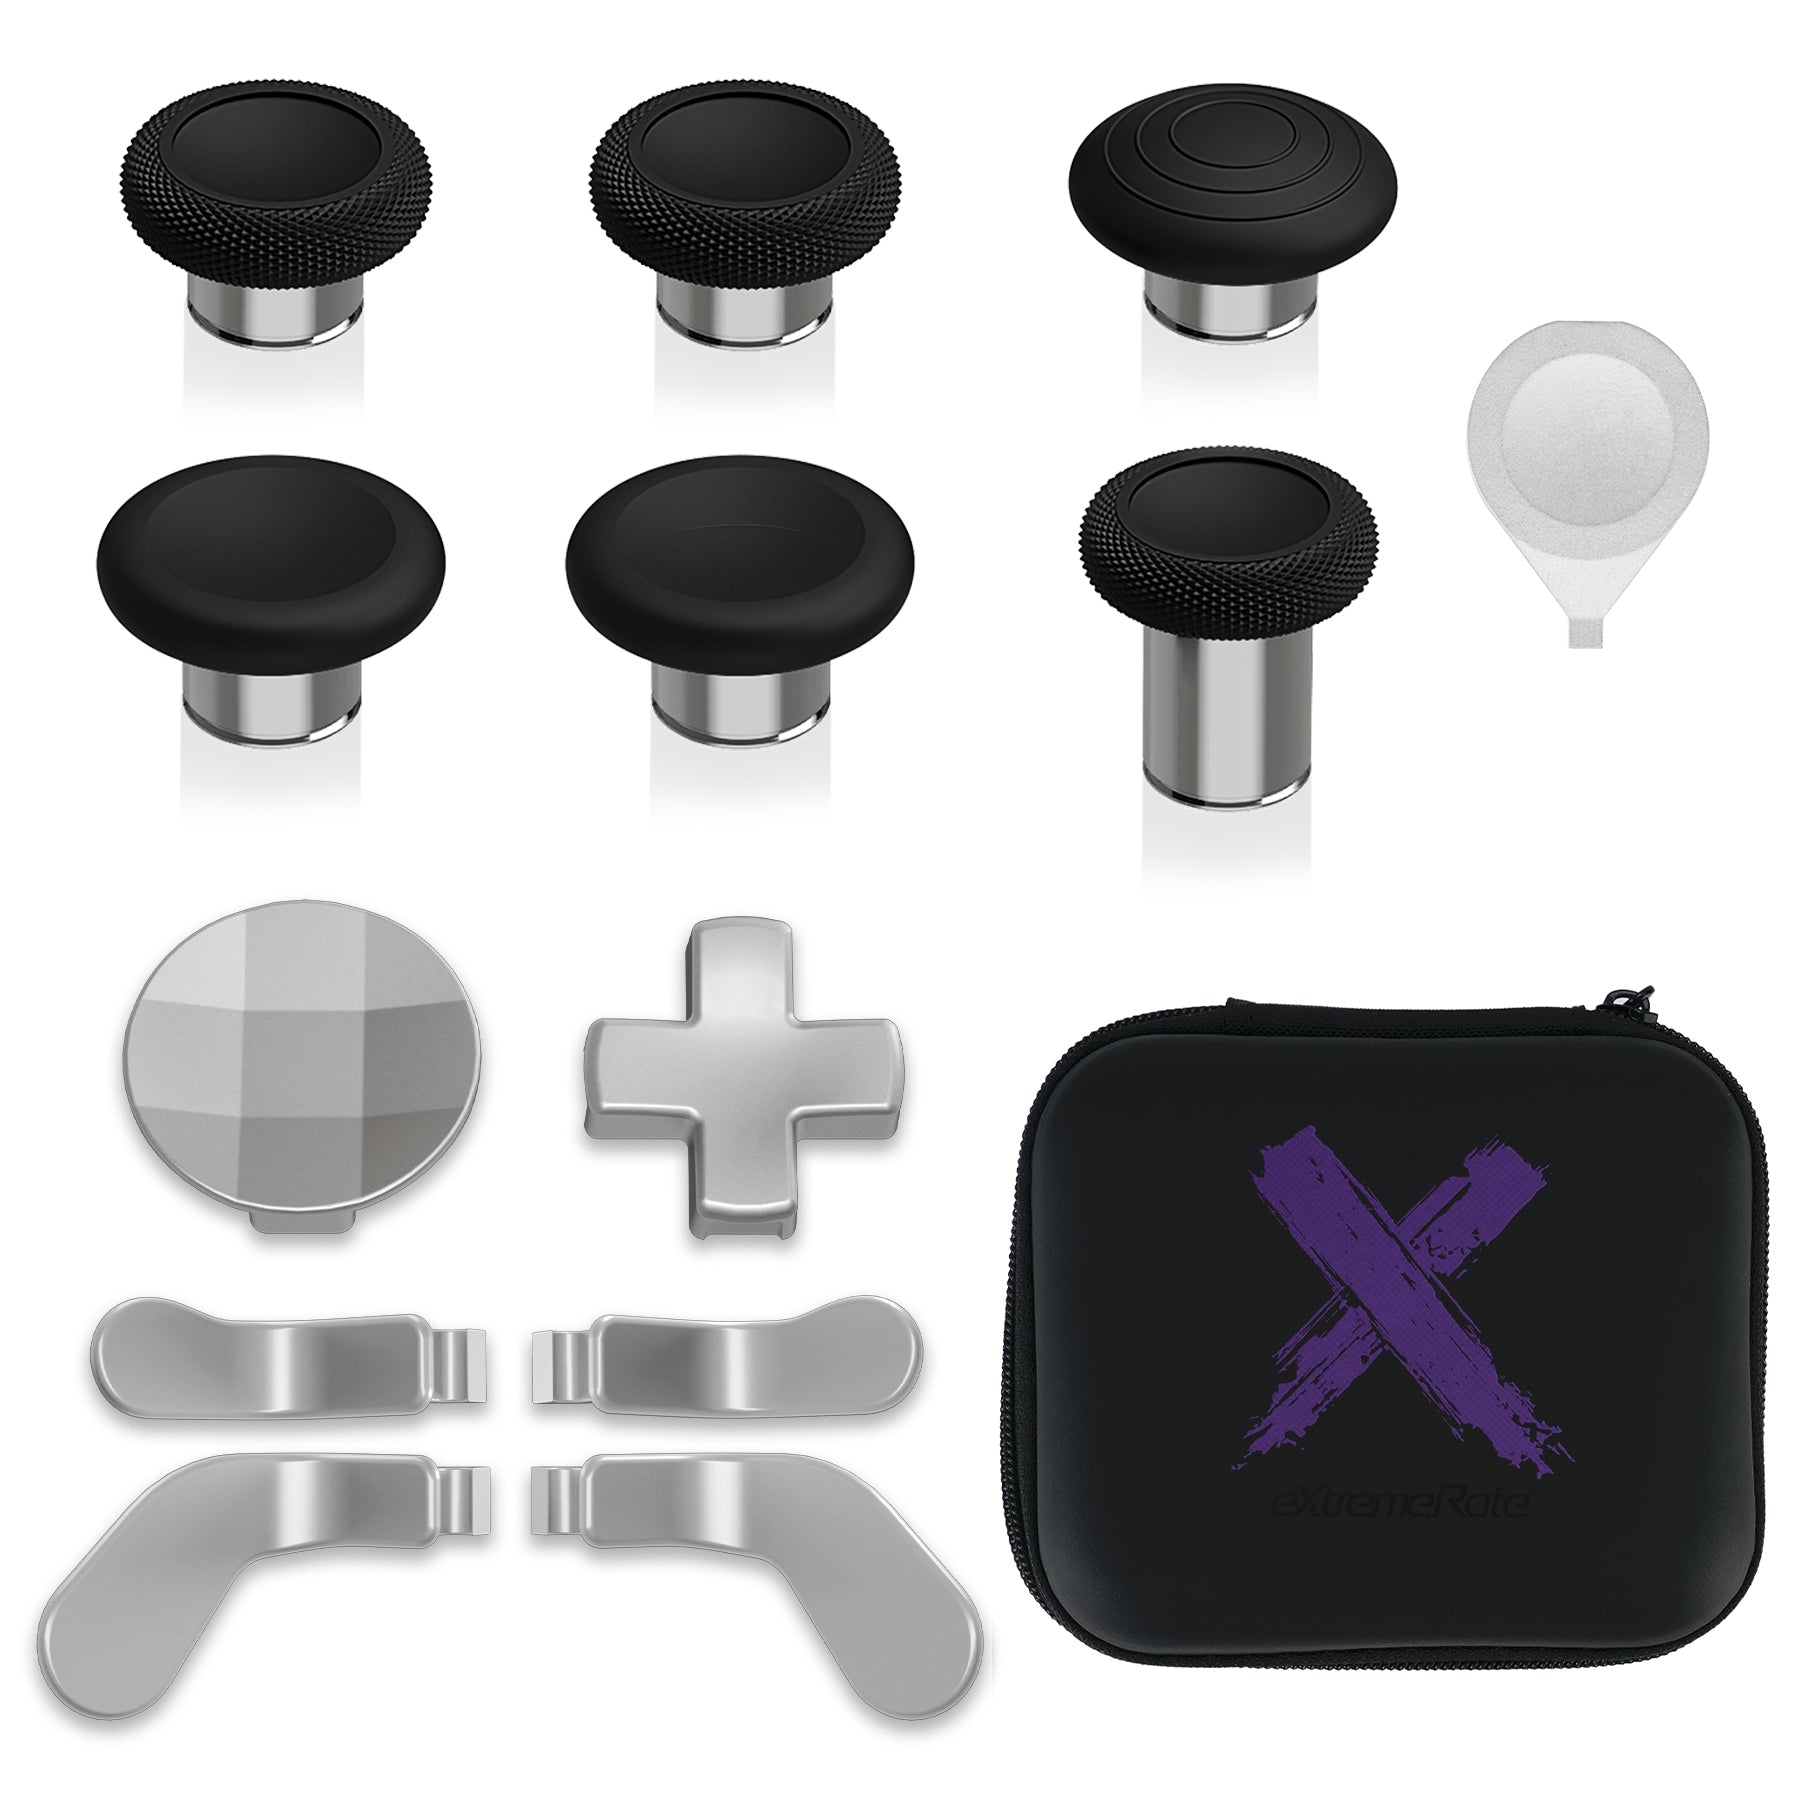 eXtremeRate 13 in 1 Component Pack Kit Replacement Metal Thumbsticks & D-Pads & Paddles for Xbox Elite Series 2 & Elite 2 Core Controller (Model 1797) - Metallic Silver eXtremeRate